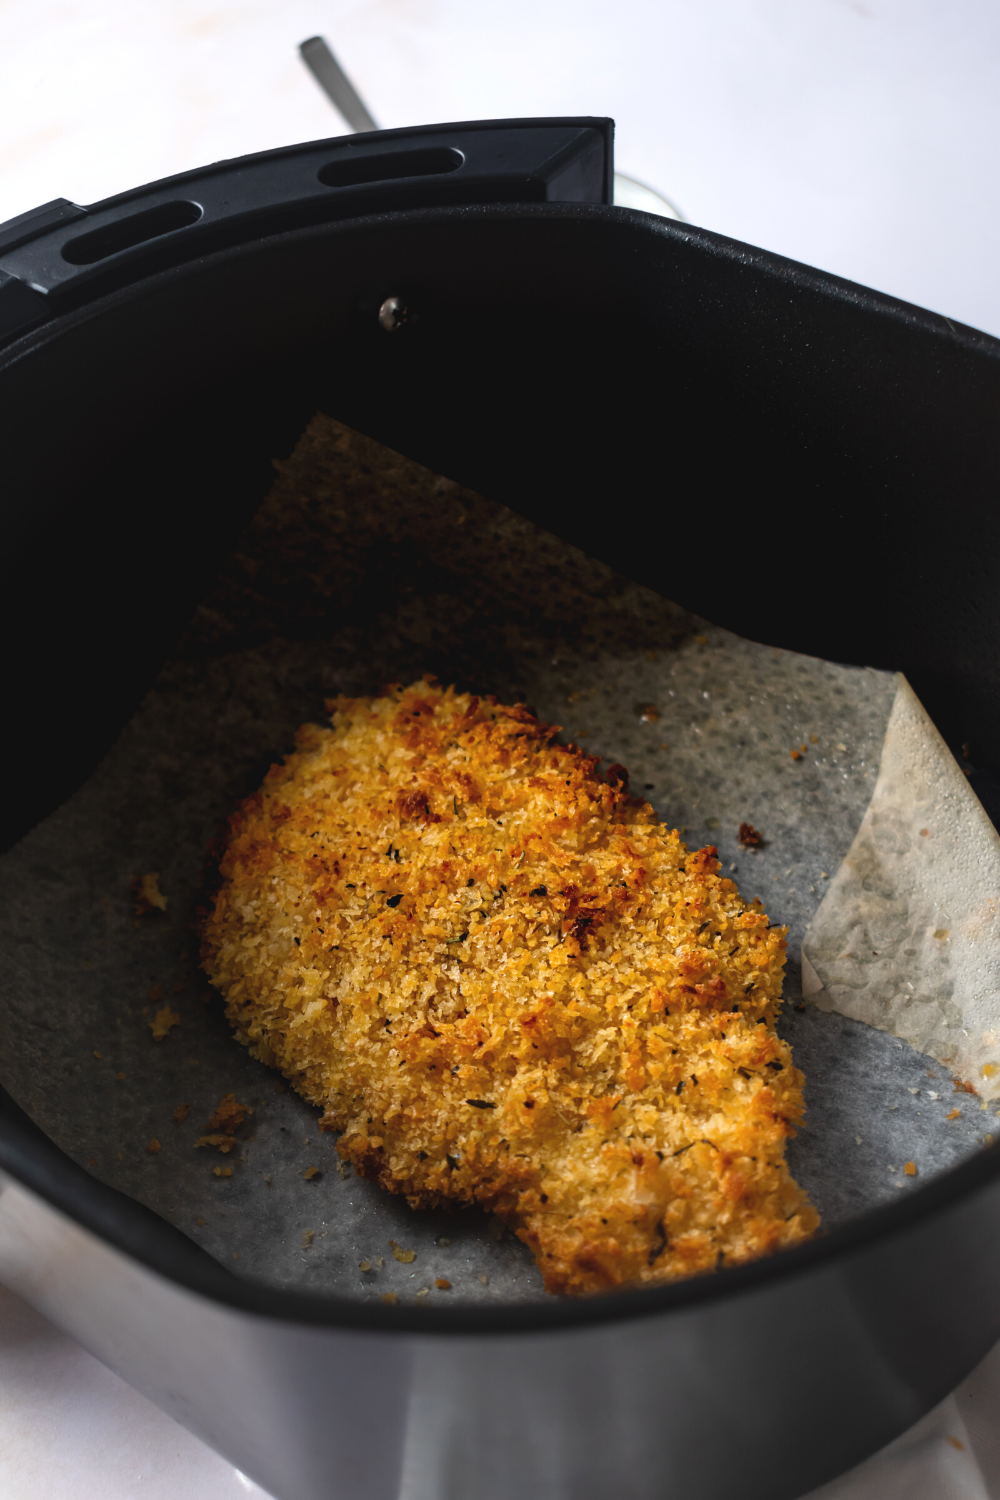 A piece of breaded fried catfish on a paper towel in an air fryer.